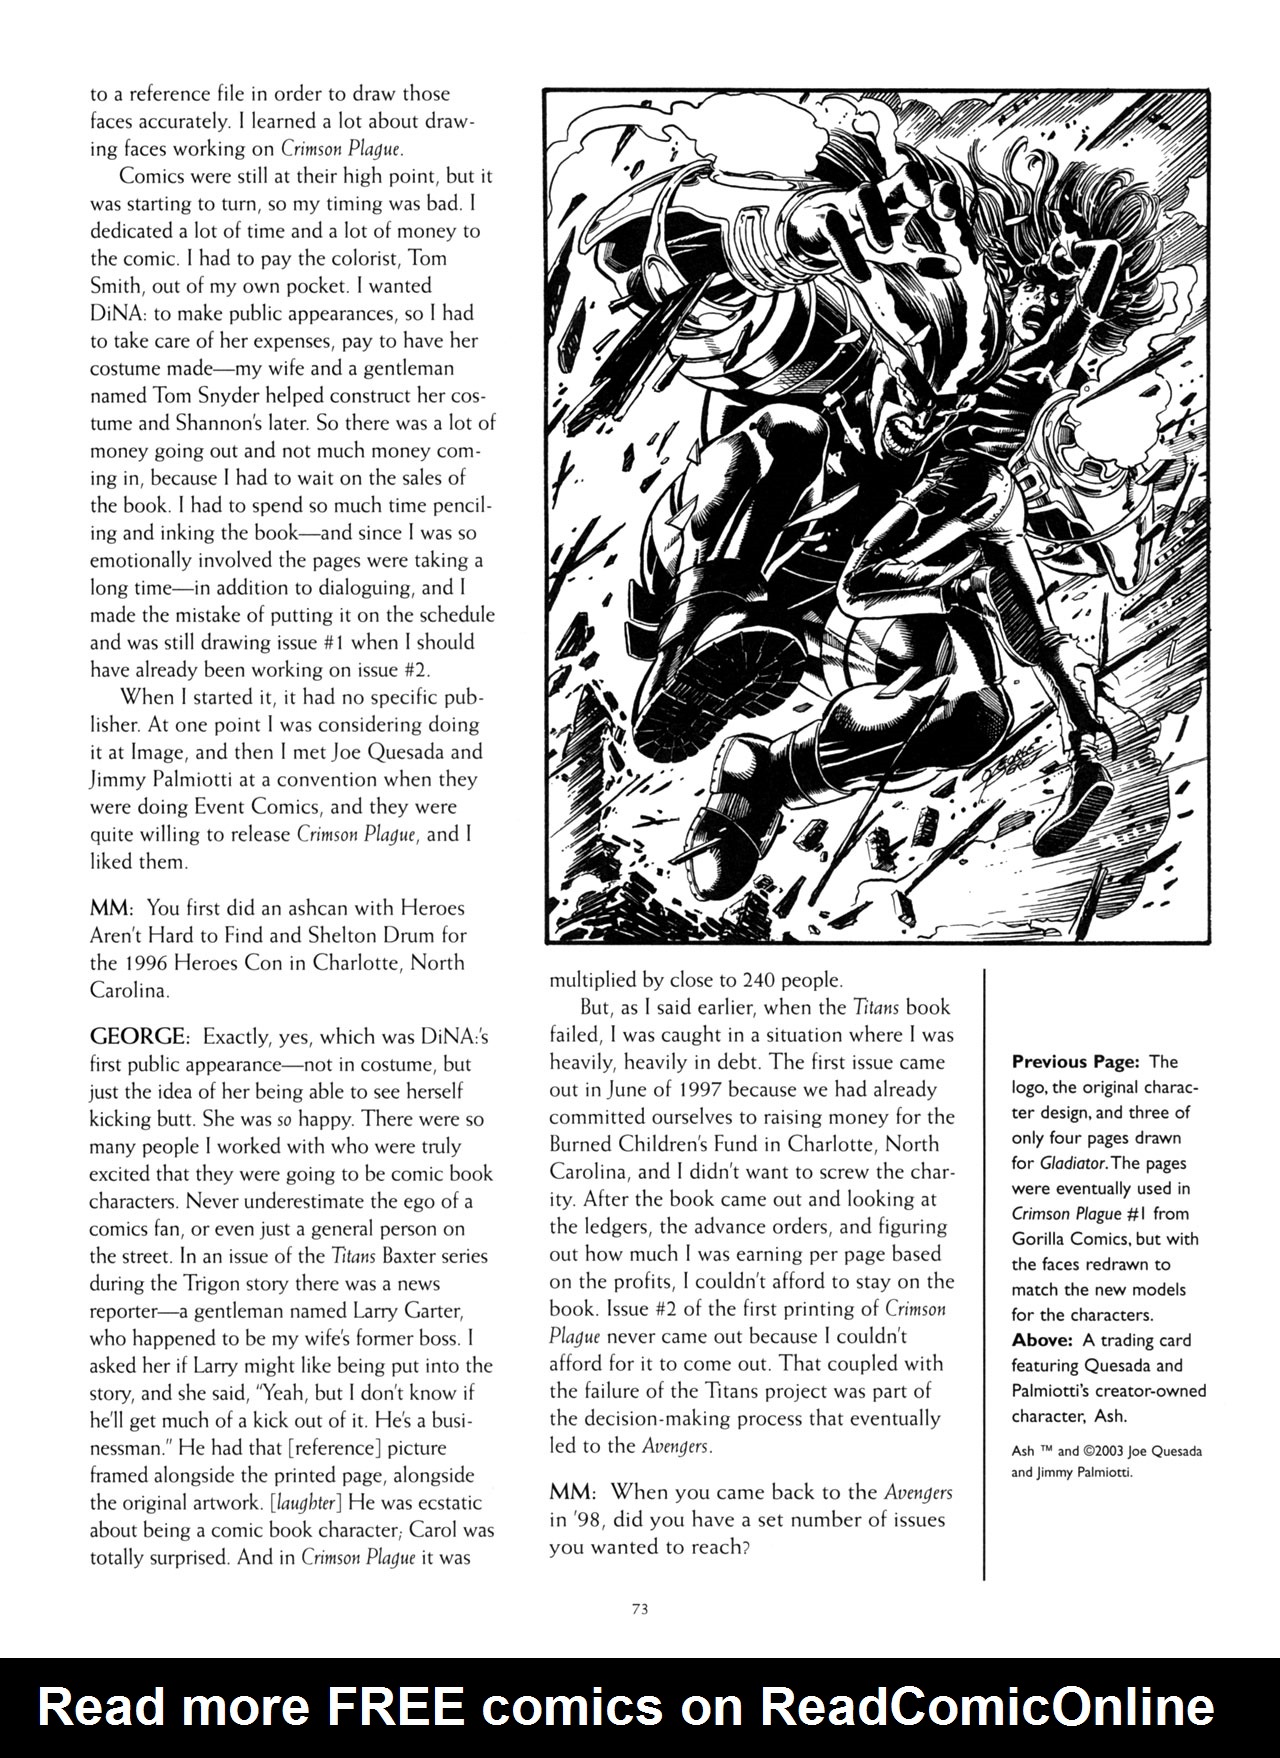 Read online Modern Masters comic -  Issue #2 - 74